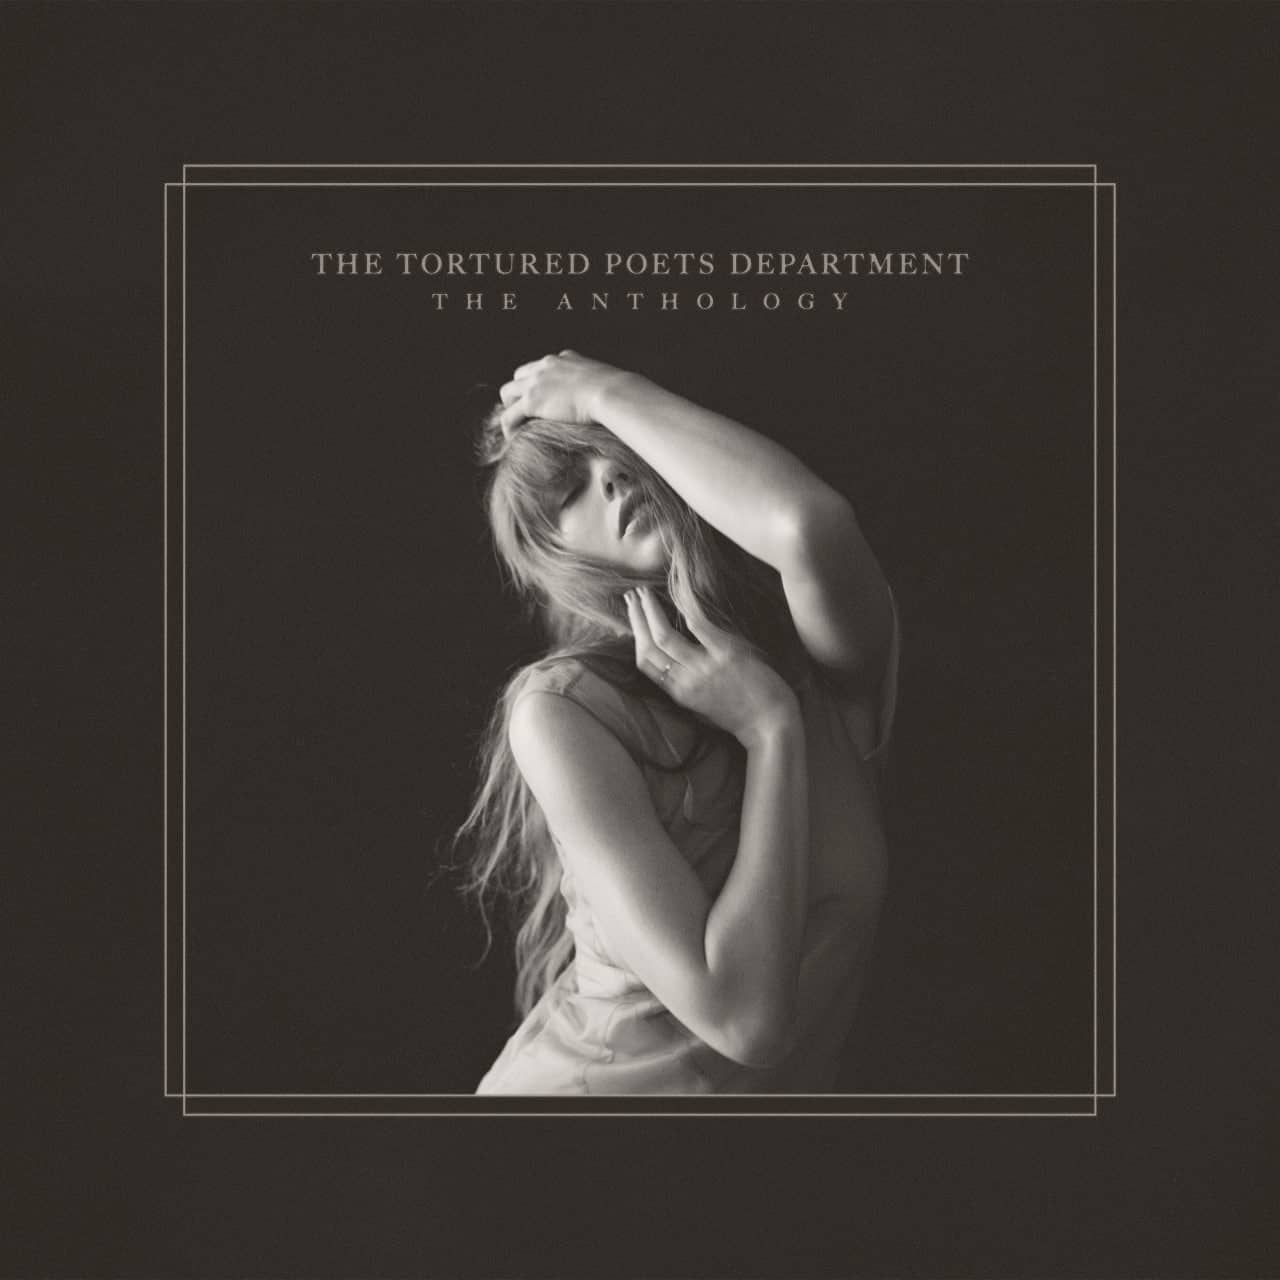 【24bit 48kHZ ALAC】Taylor Swift - THE TORTURED POETS DEPARTMENT：THE ANTHOLOGY